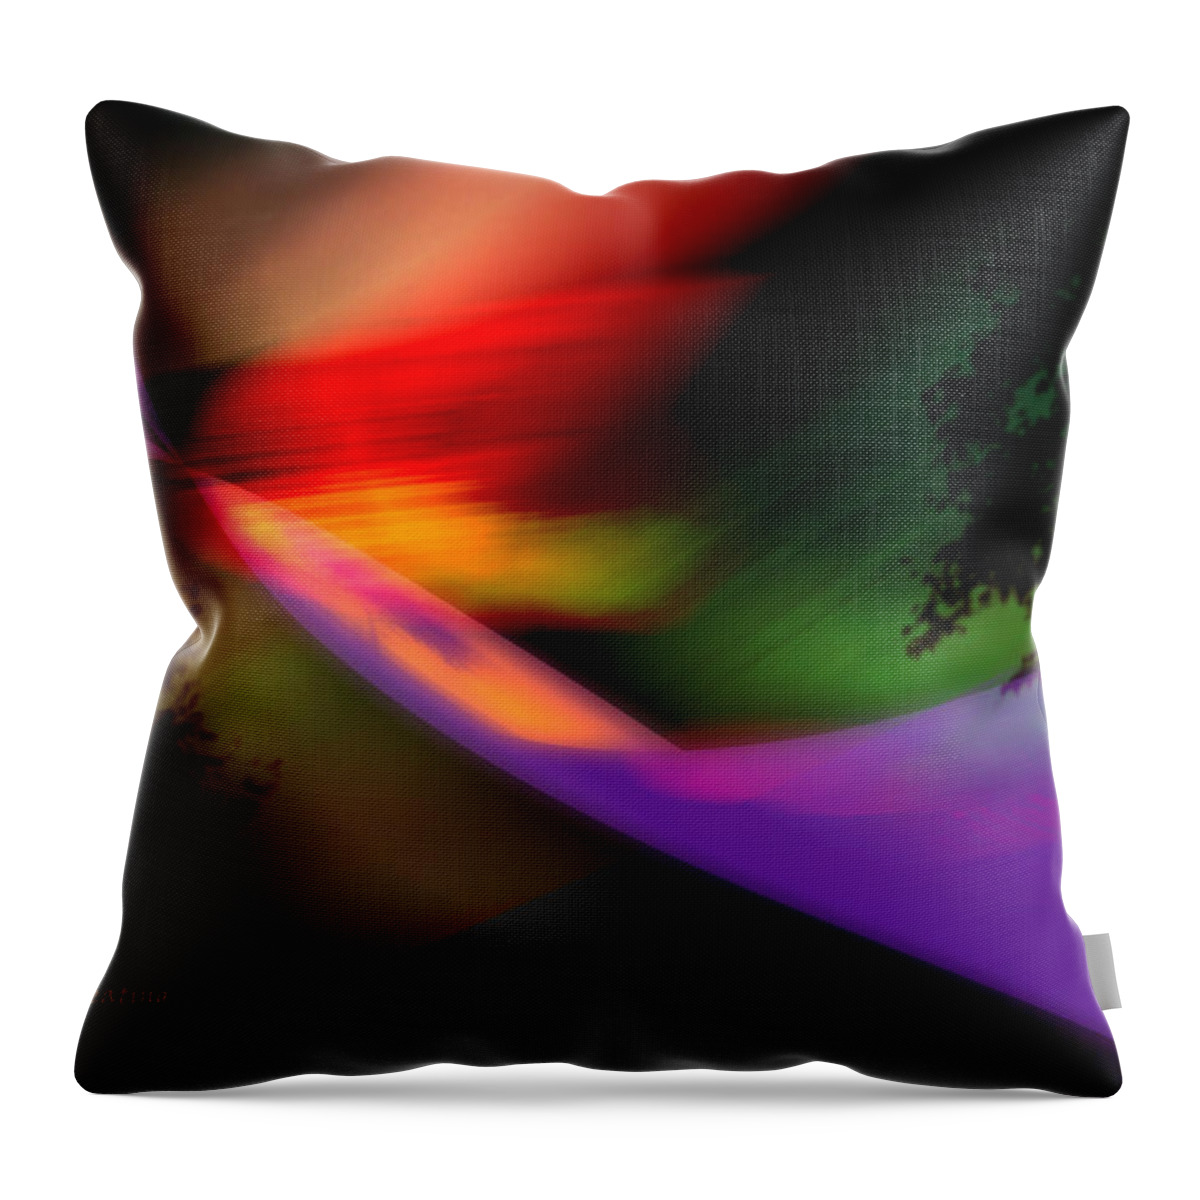  Gerlinde-keating Throw Pillow featuring the painting Our World by Gerlinde Keating - Galleria GK Keating Associates Inc